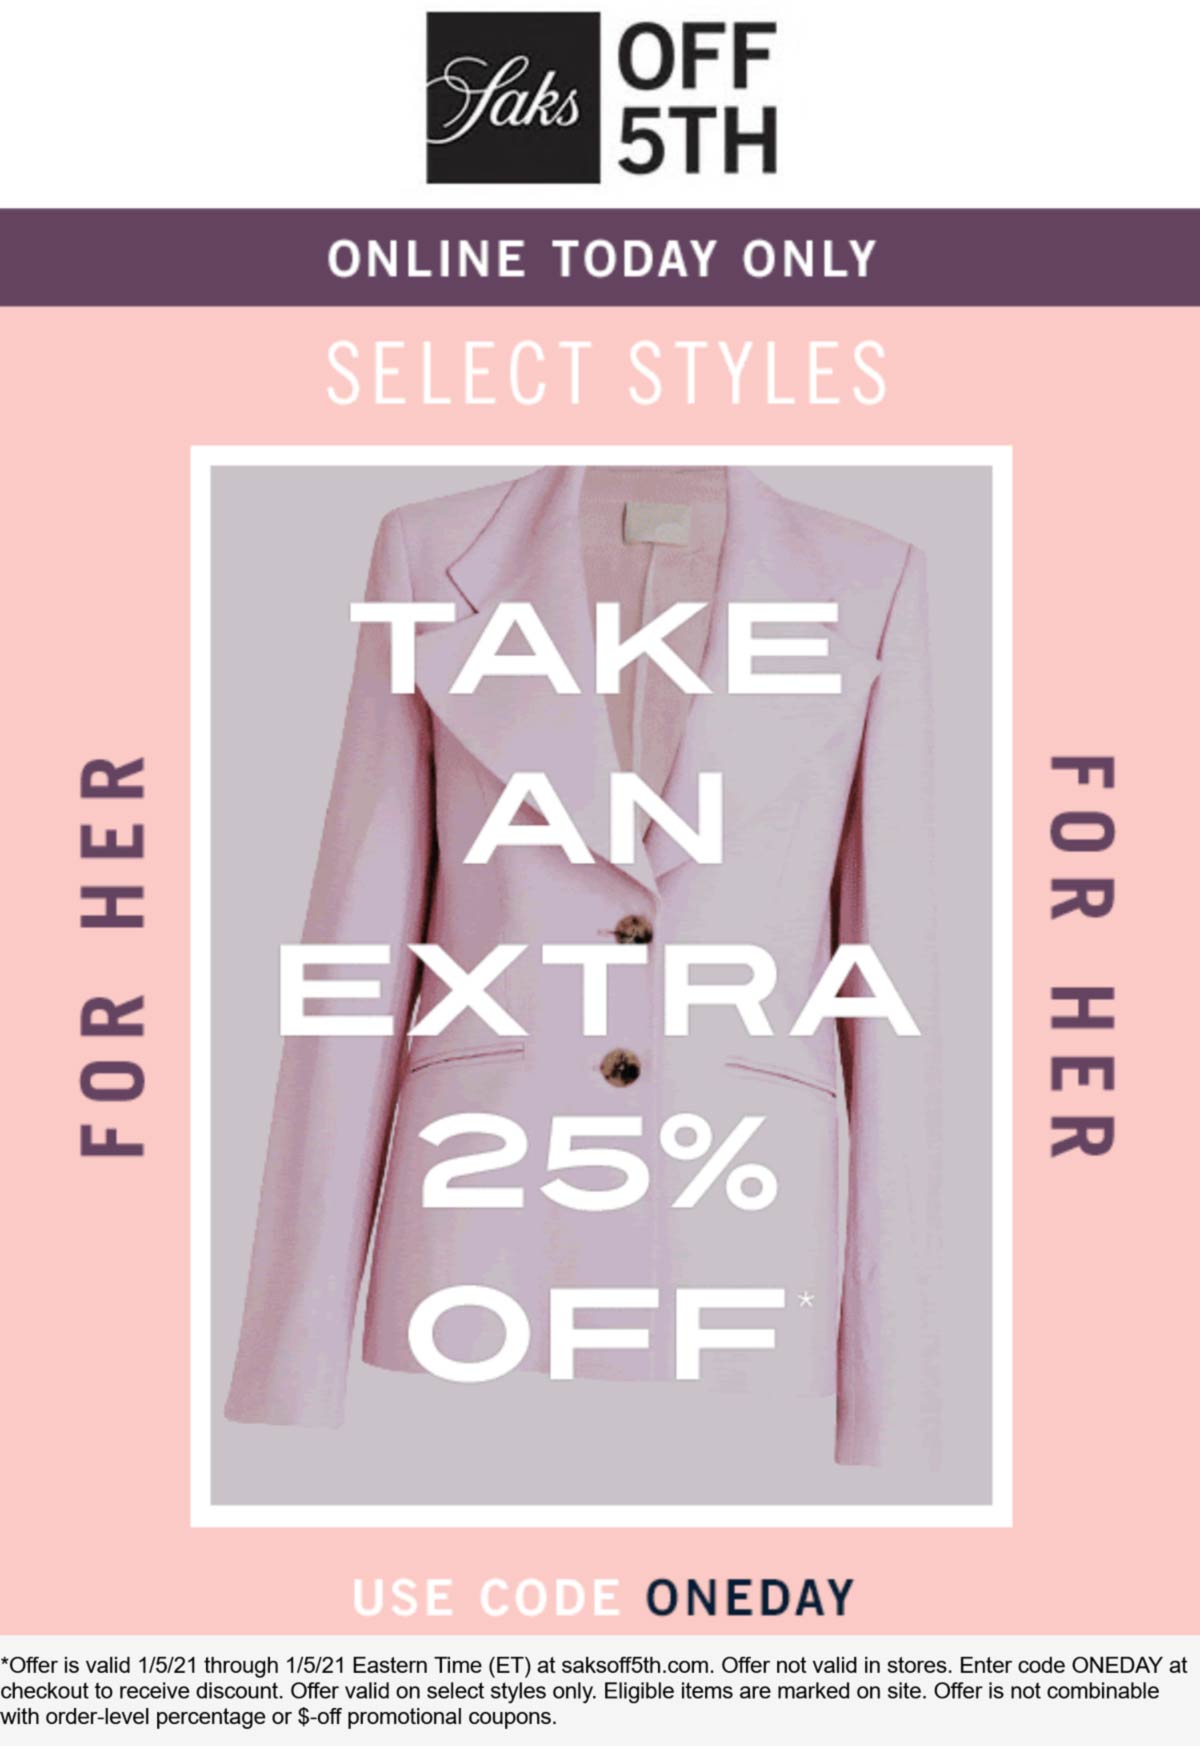 OFF 5TH stores Coupon  Extra 25% off online today at Saks OFF 5TH via promo code ONEDAY #off5th 